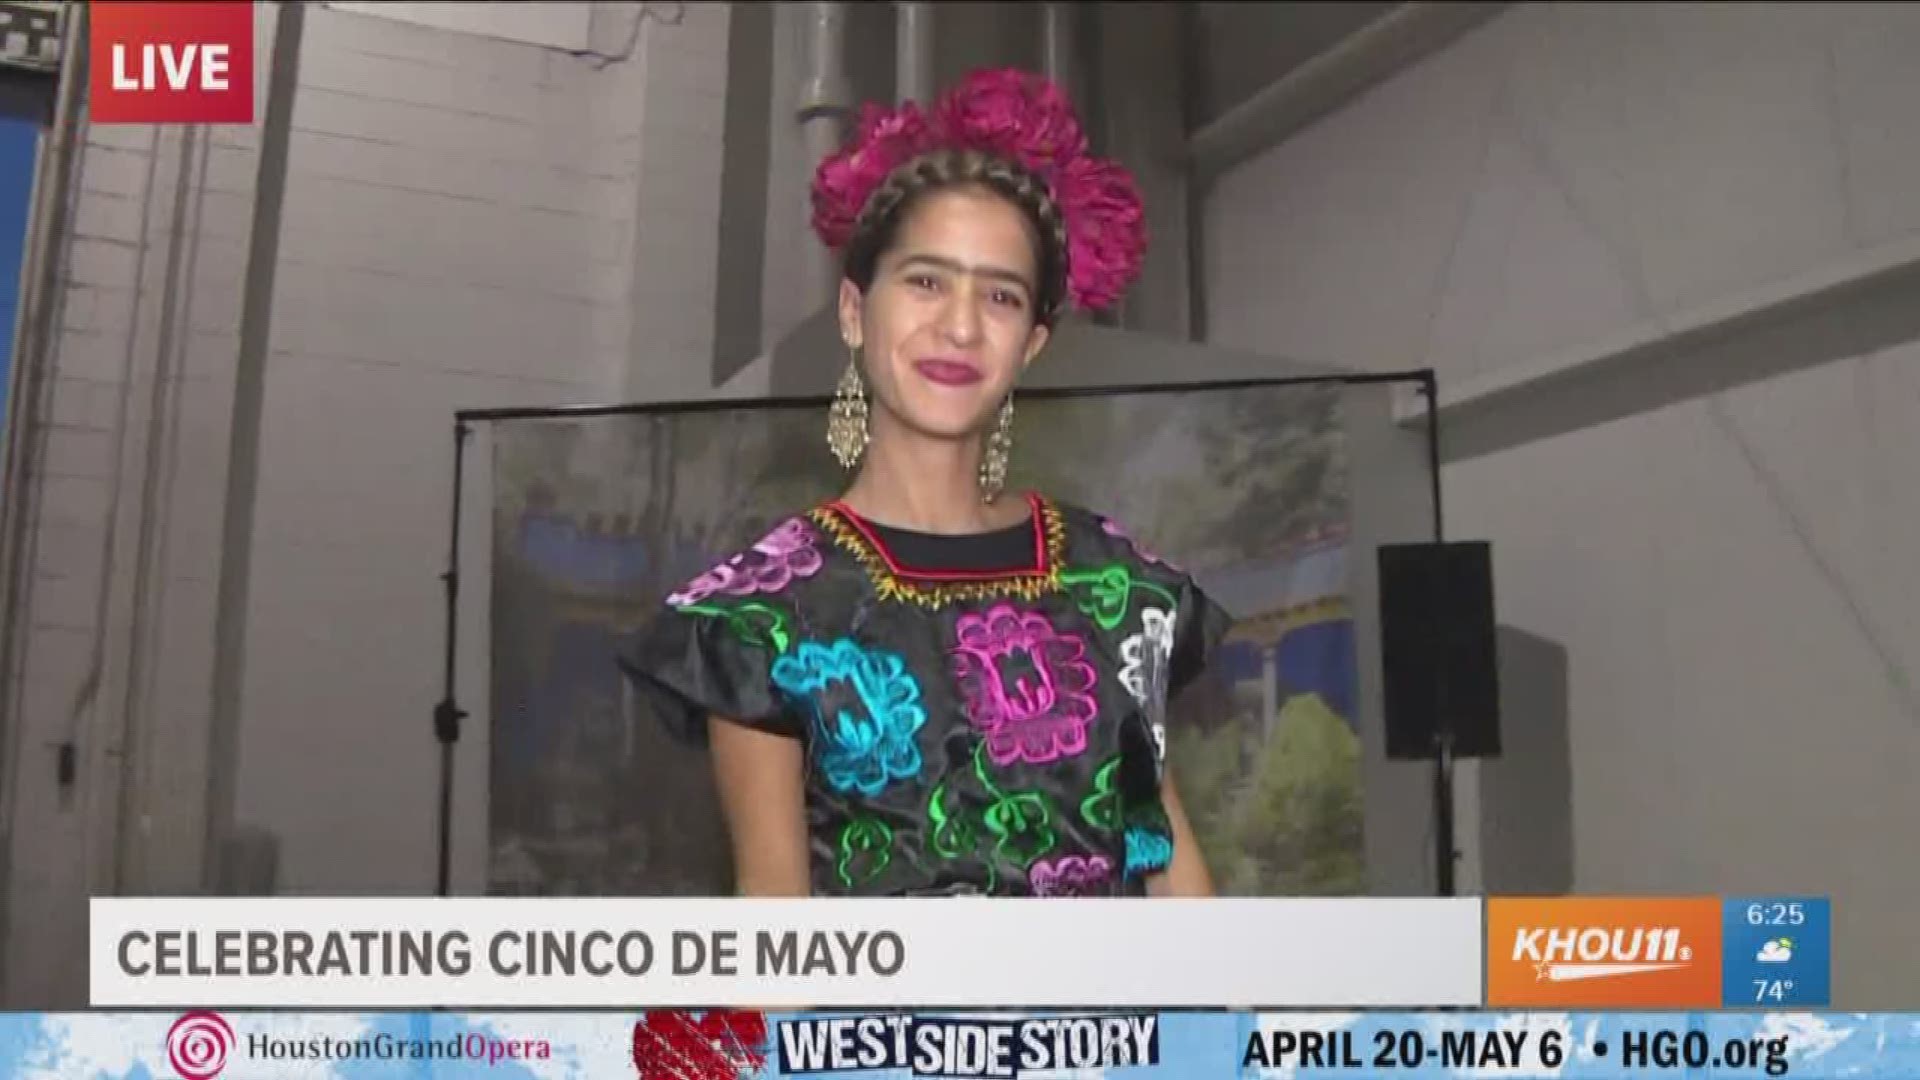 Saturday is Cinco de Mayo and there will be celebrations all over town. But Sherry Williams was starting early Frida, and she's not alone. She's at a party just west of downtown at Silver Street Studios. For more info on Saturday's Cinco in the City celebration, visit: https://www.inthecityproductions.com/